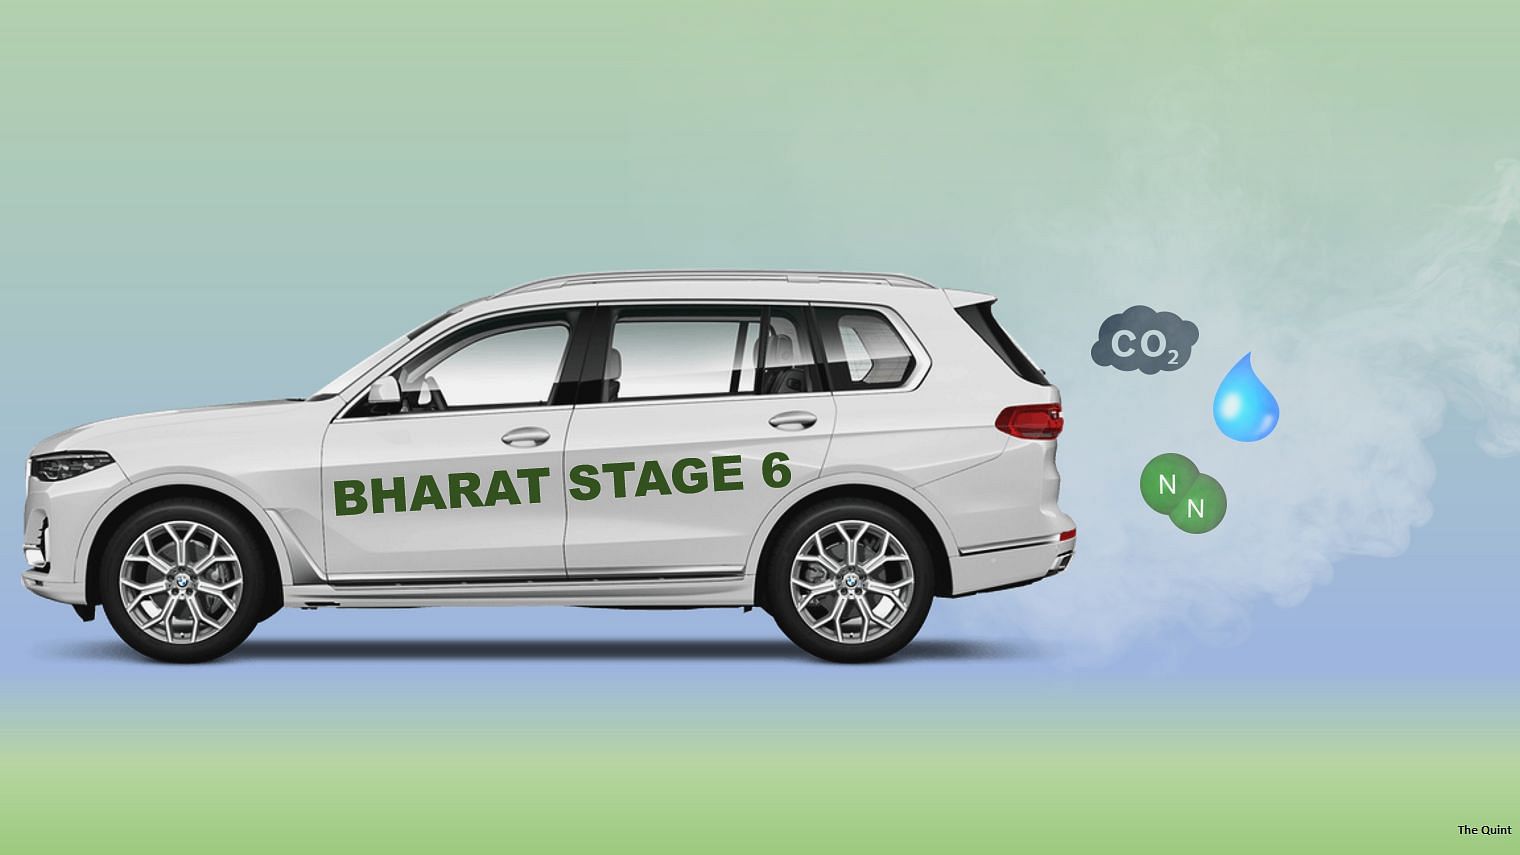 India shifts to Bharat Stage VI emission norms (Euro 6) by April 2020.